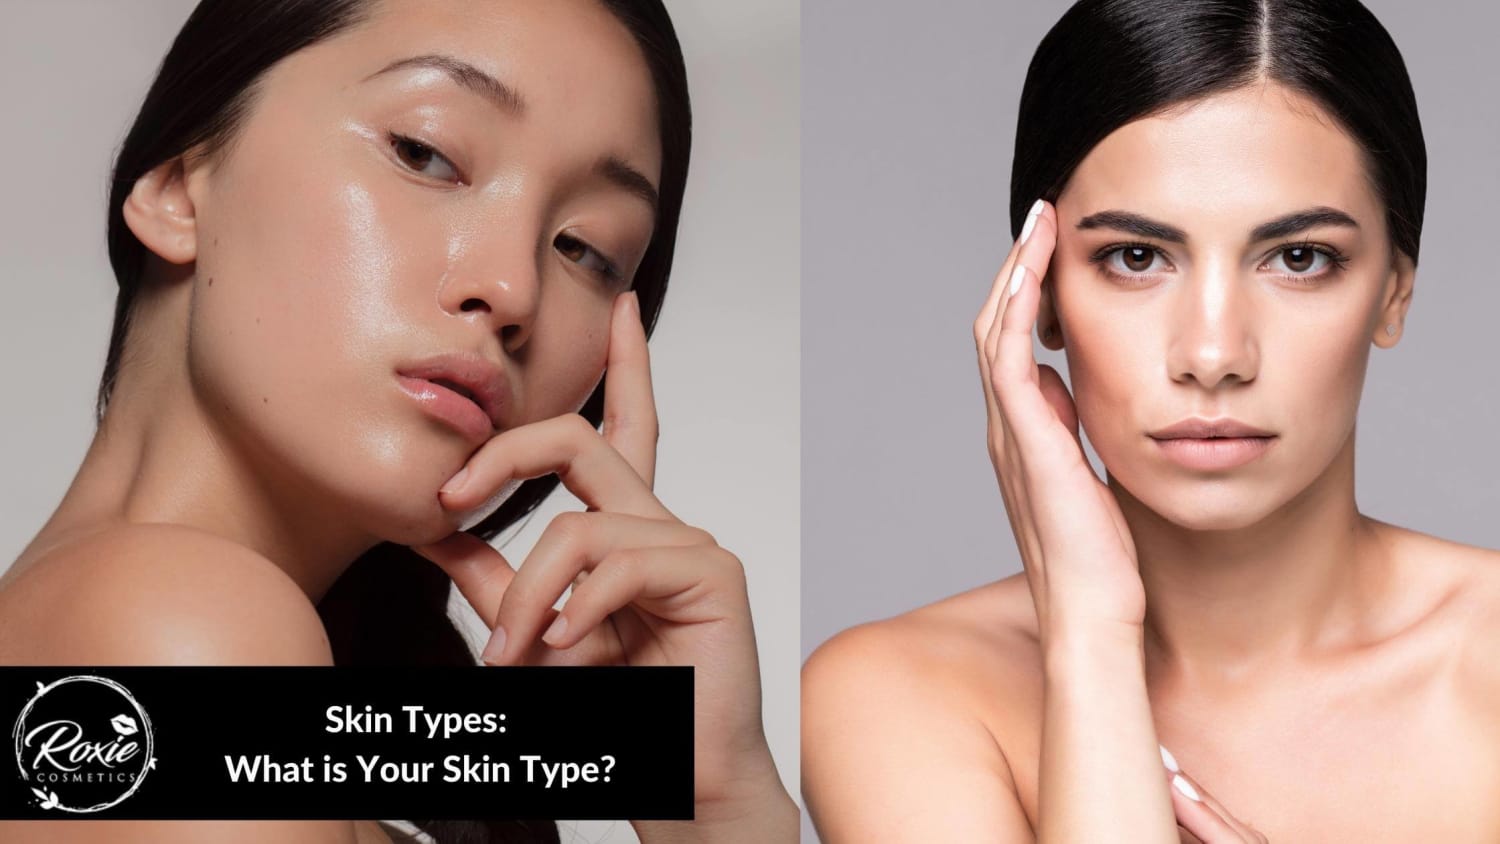 Skin Types: What is Your Skin Type?